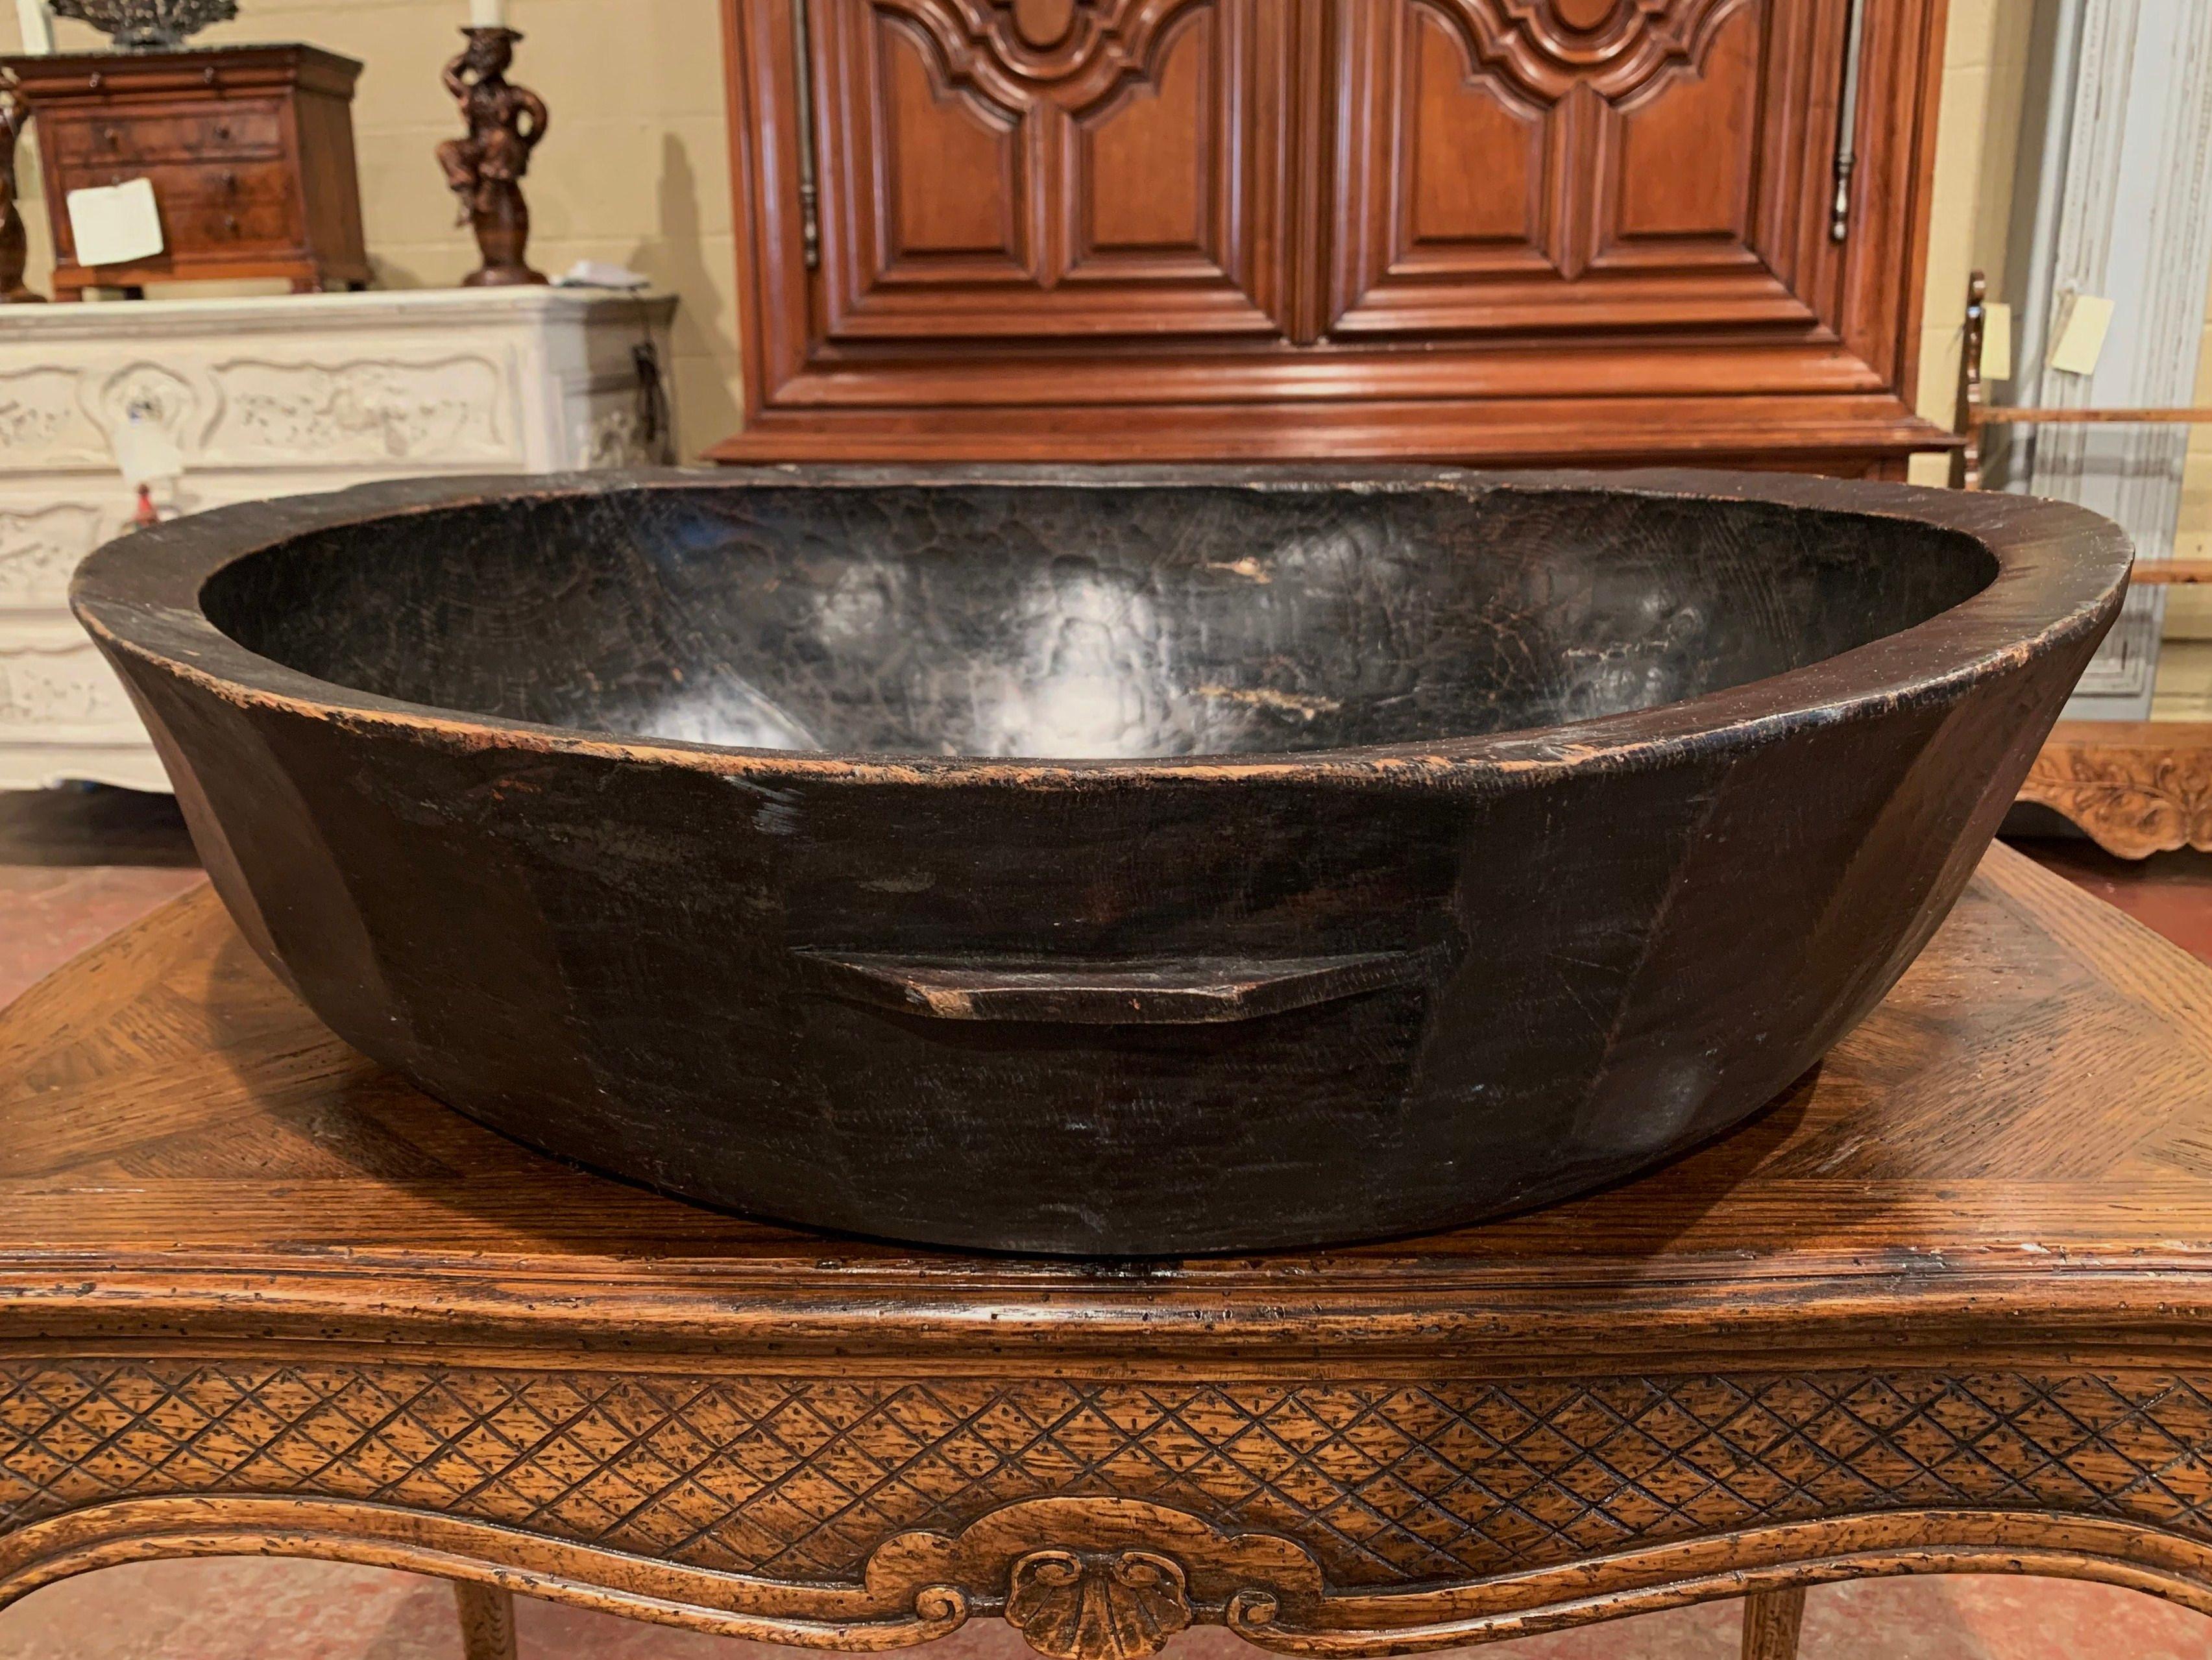 Fill up this elegant antique bowl with fruit and use it as a center piece on a dining room table! Hand crafted in Spain circa 1870, the large bowl in round in shape embellished with small handles and adorns a rich walnut patina.
Measures: 28.75